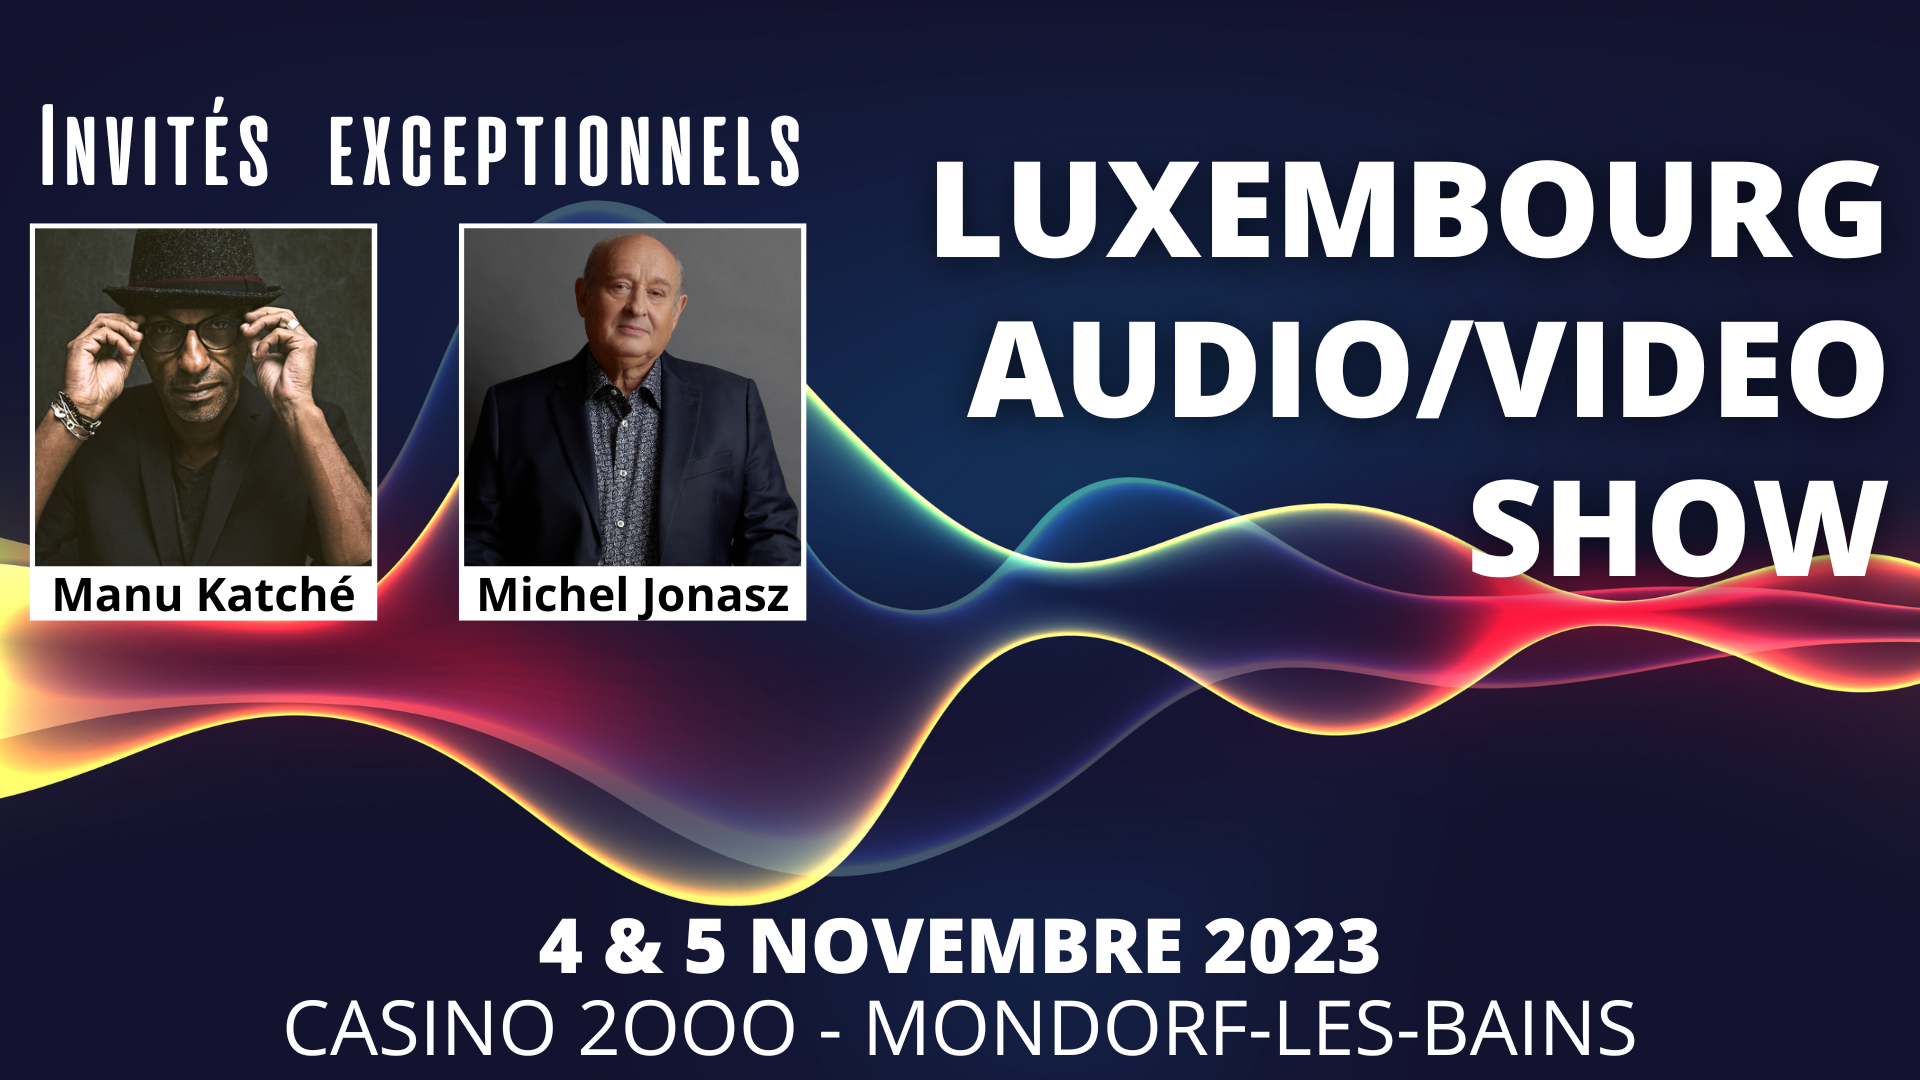 Luxembourg audio / video show